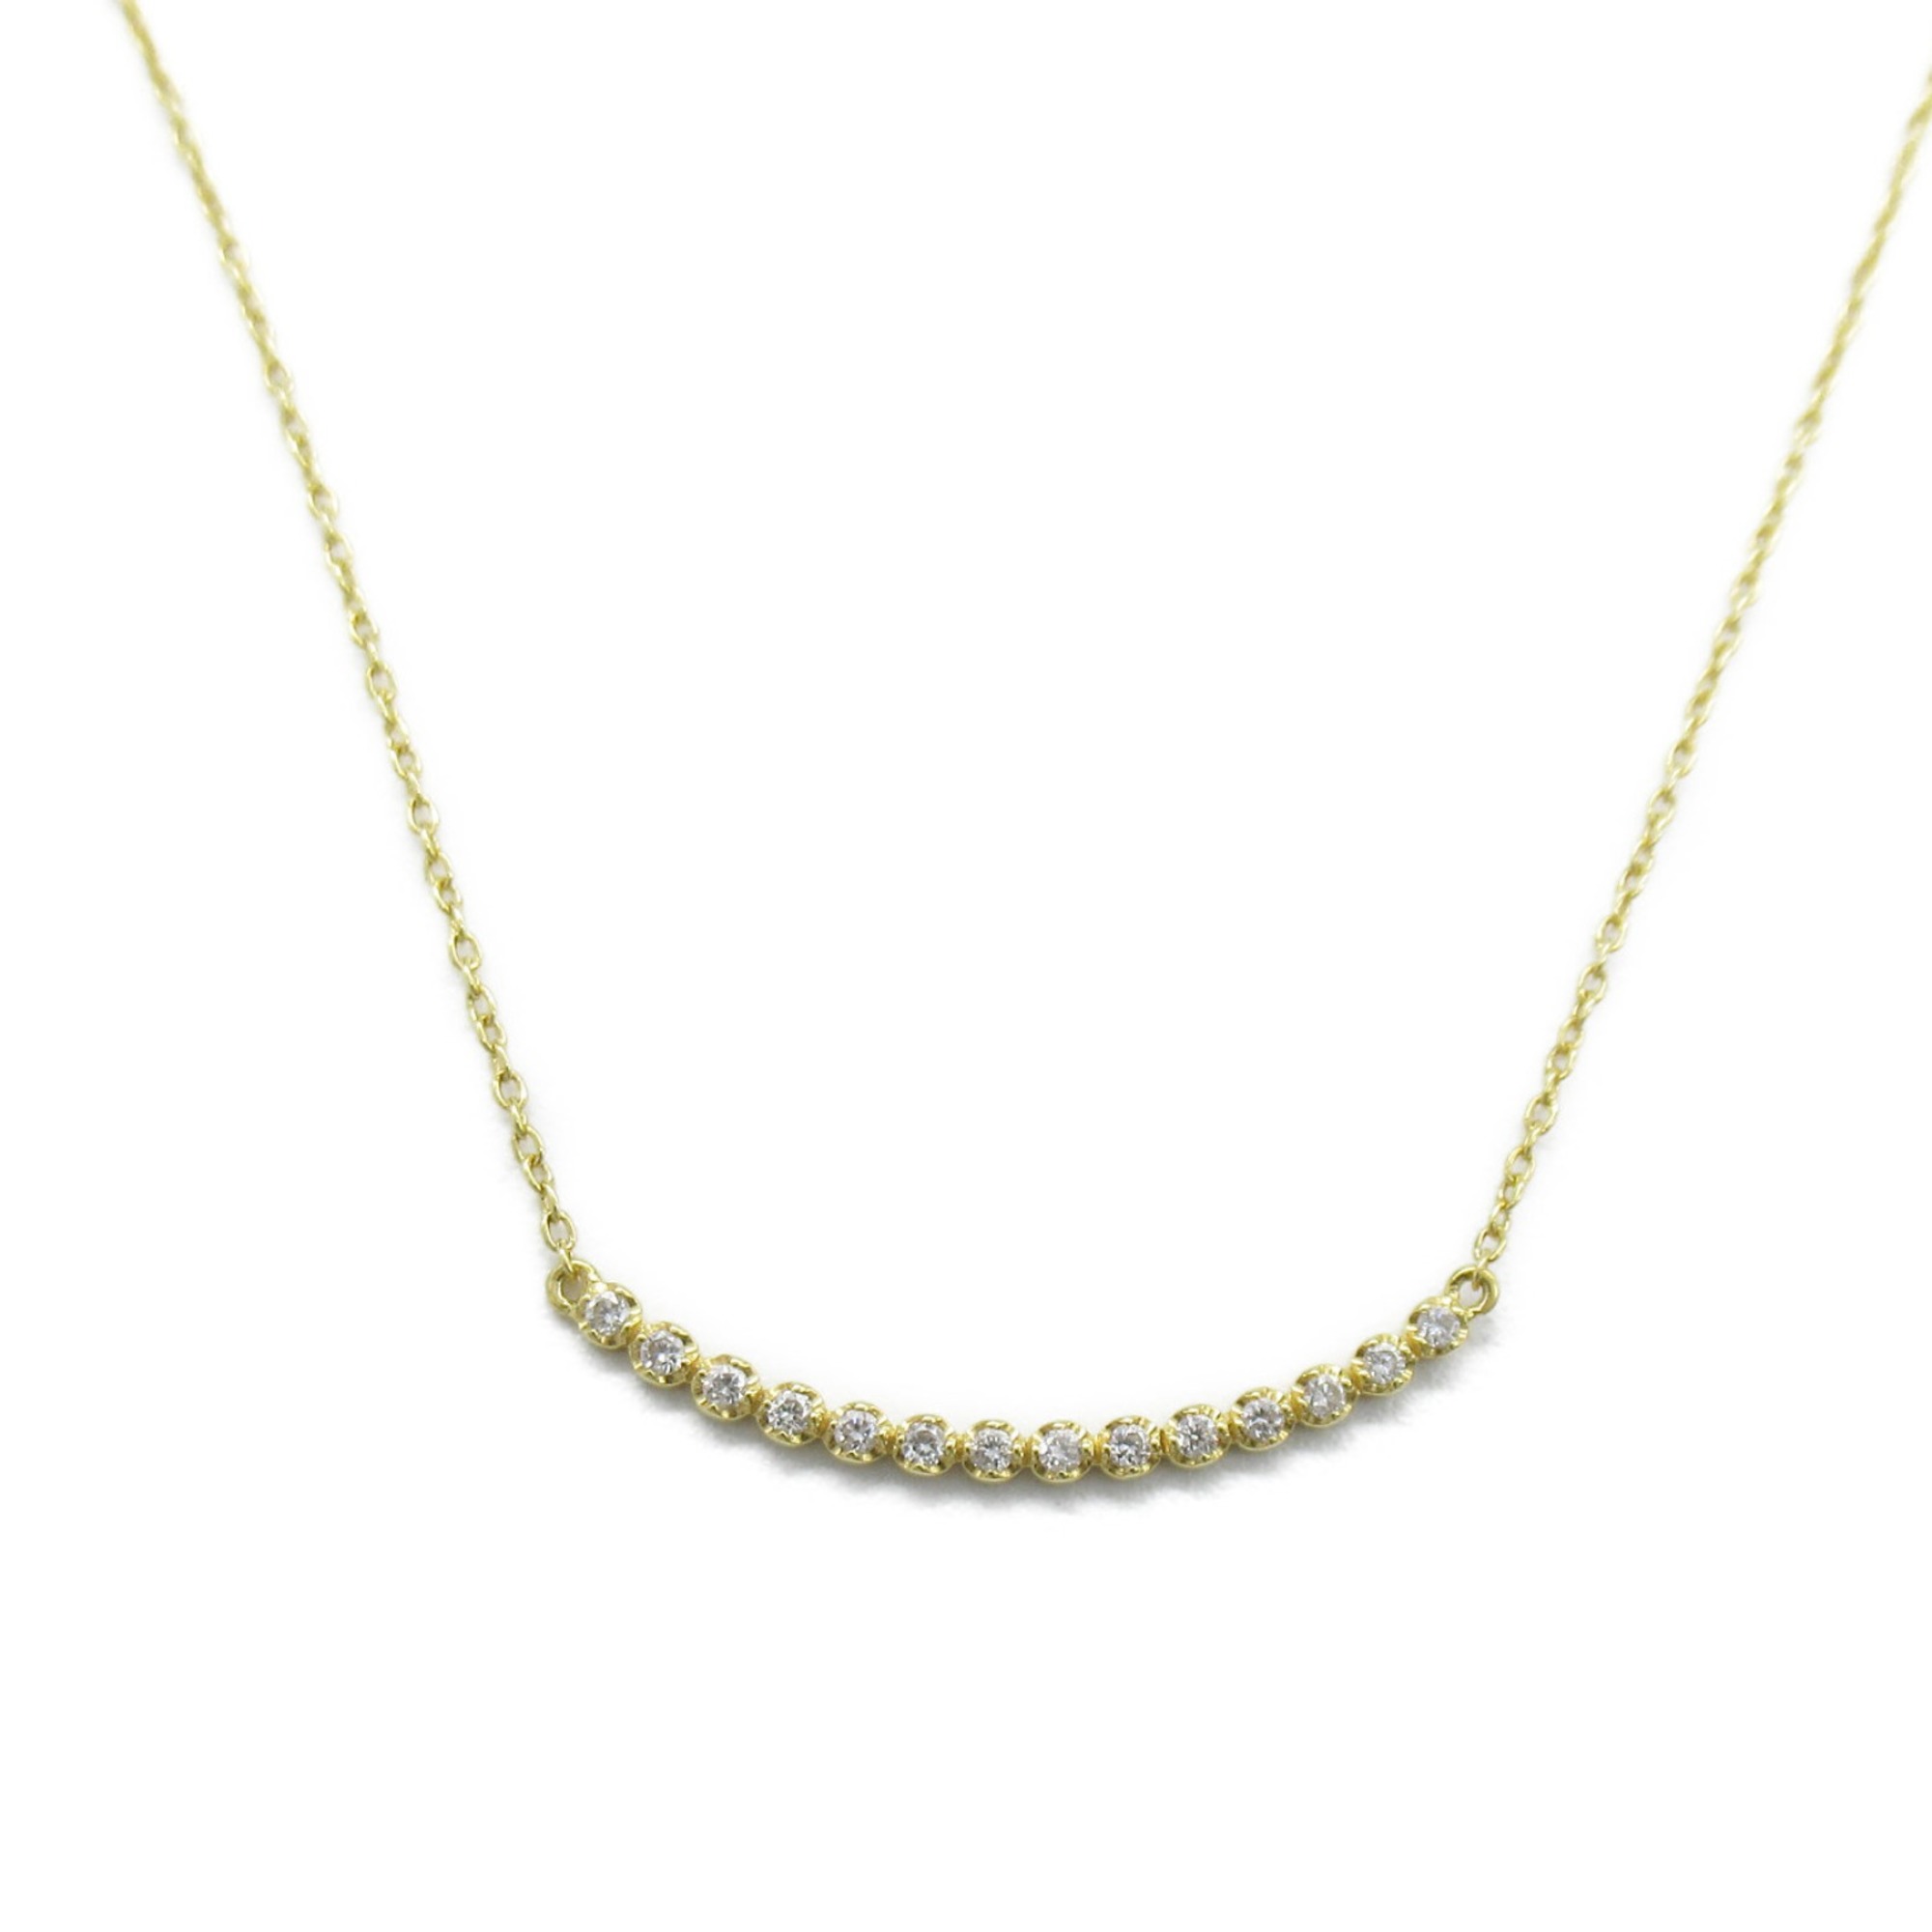 AHKAH Believe You Diamond Necklace Necklace Clear  K18 (Yellow Gold) Clear